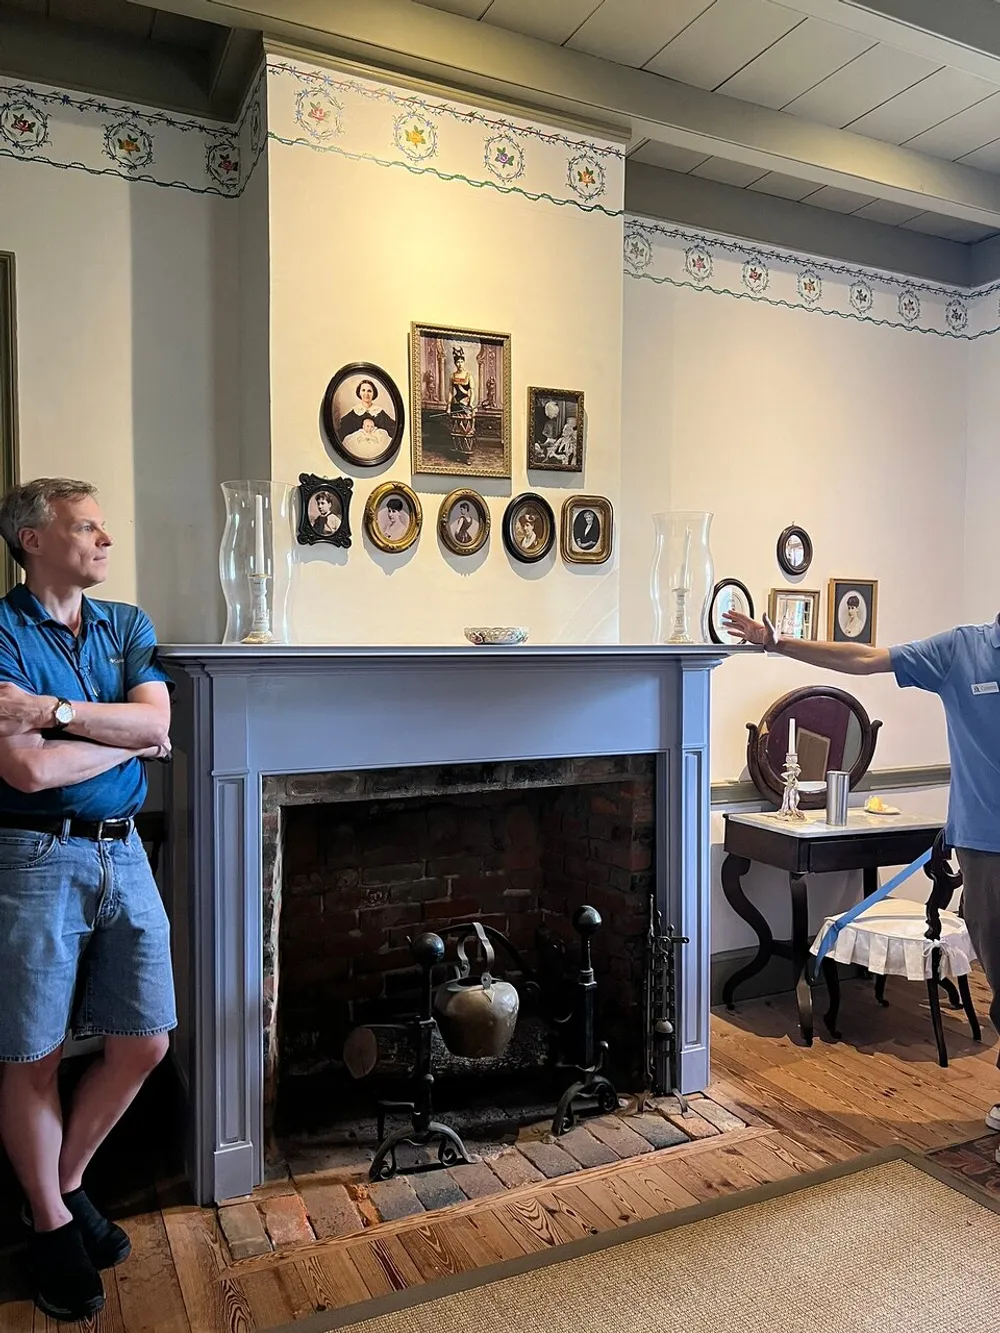 A man stands to the left arms crossed looking at an antique fireplace beneath a decorated wall with framed portraits while another persons arm is visible to the right in a room with vintage furnishings and decor